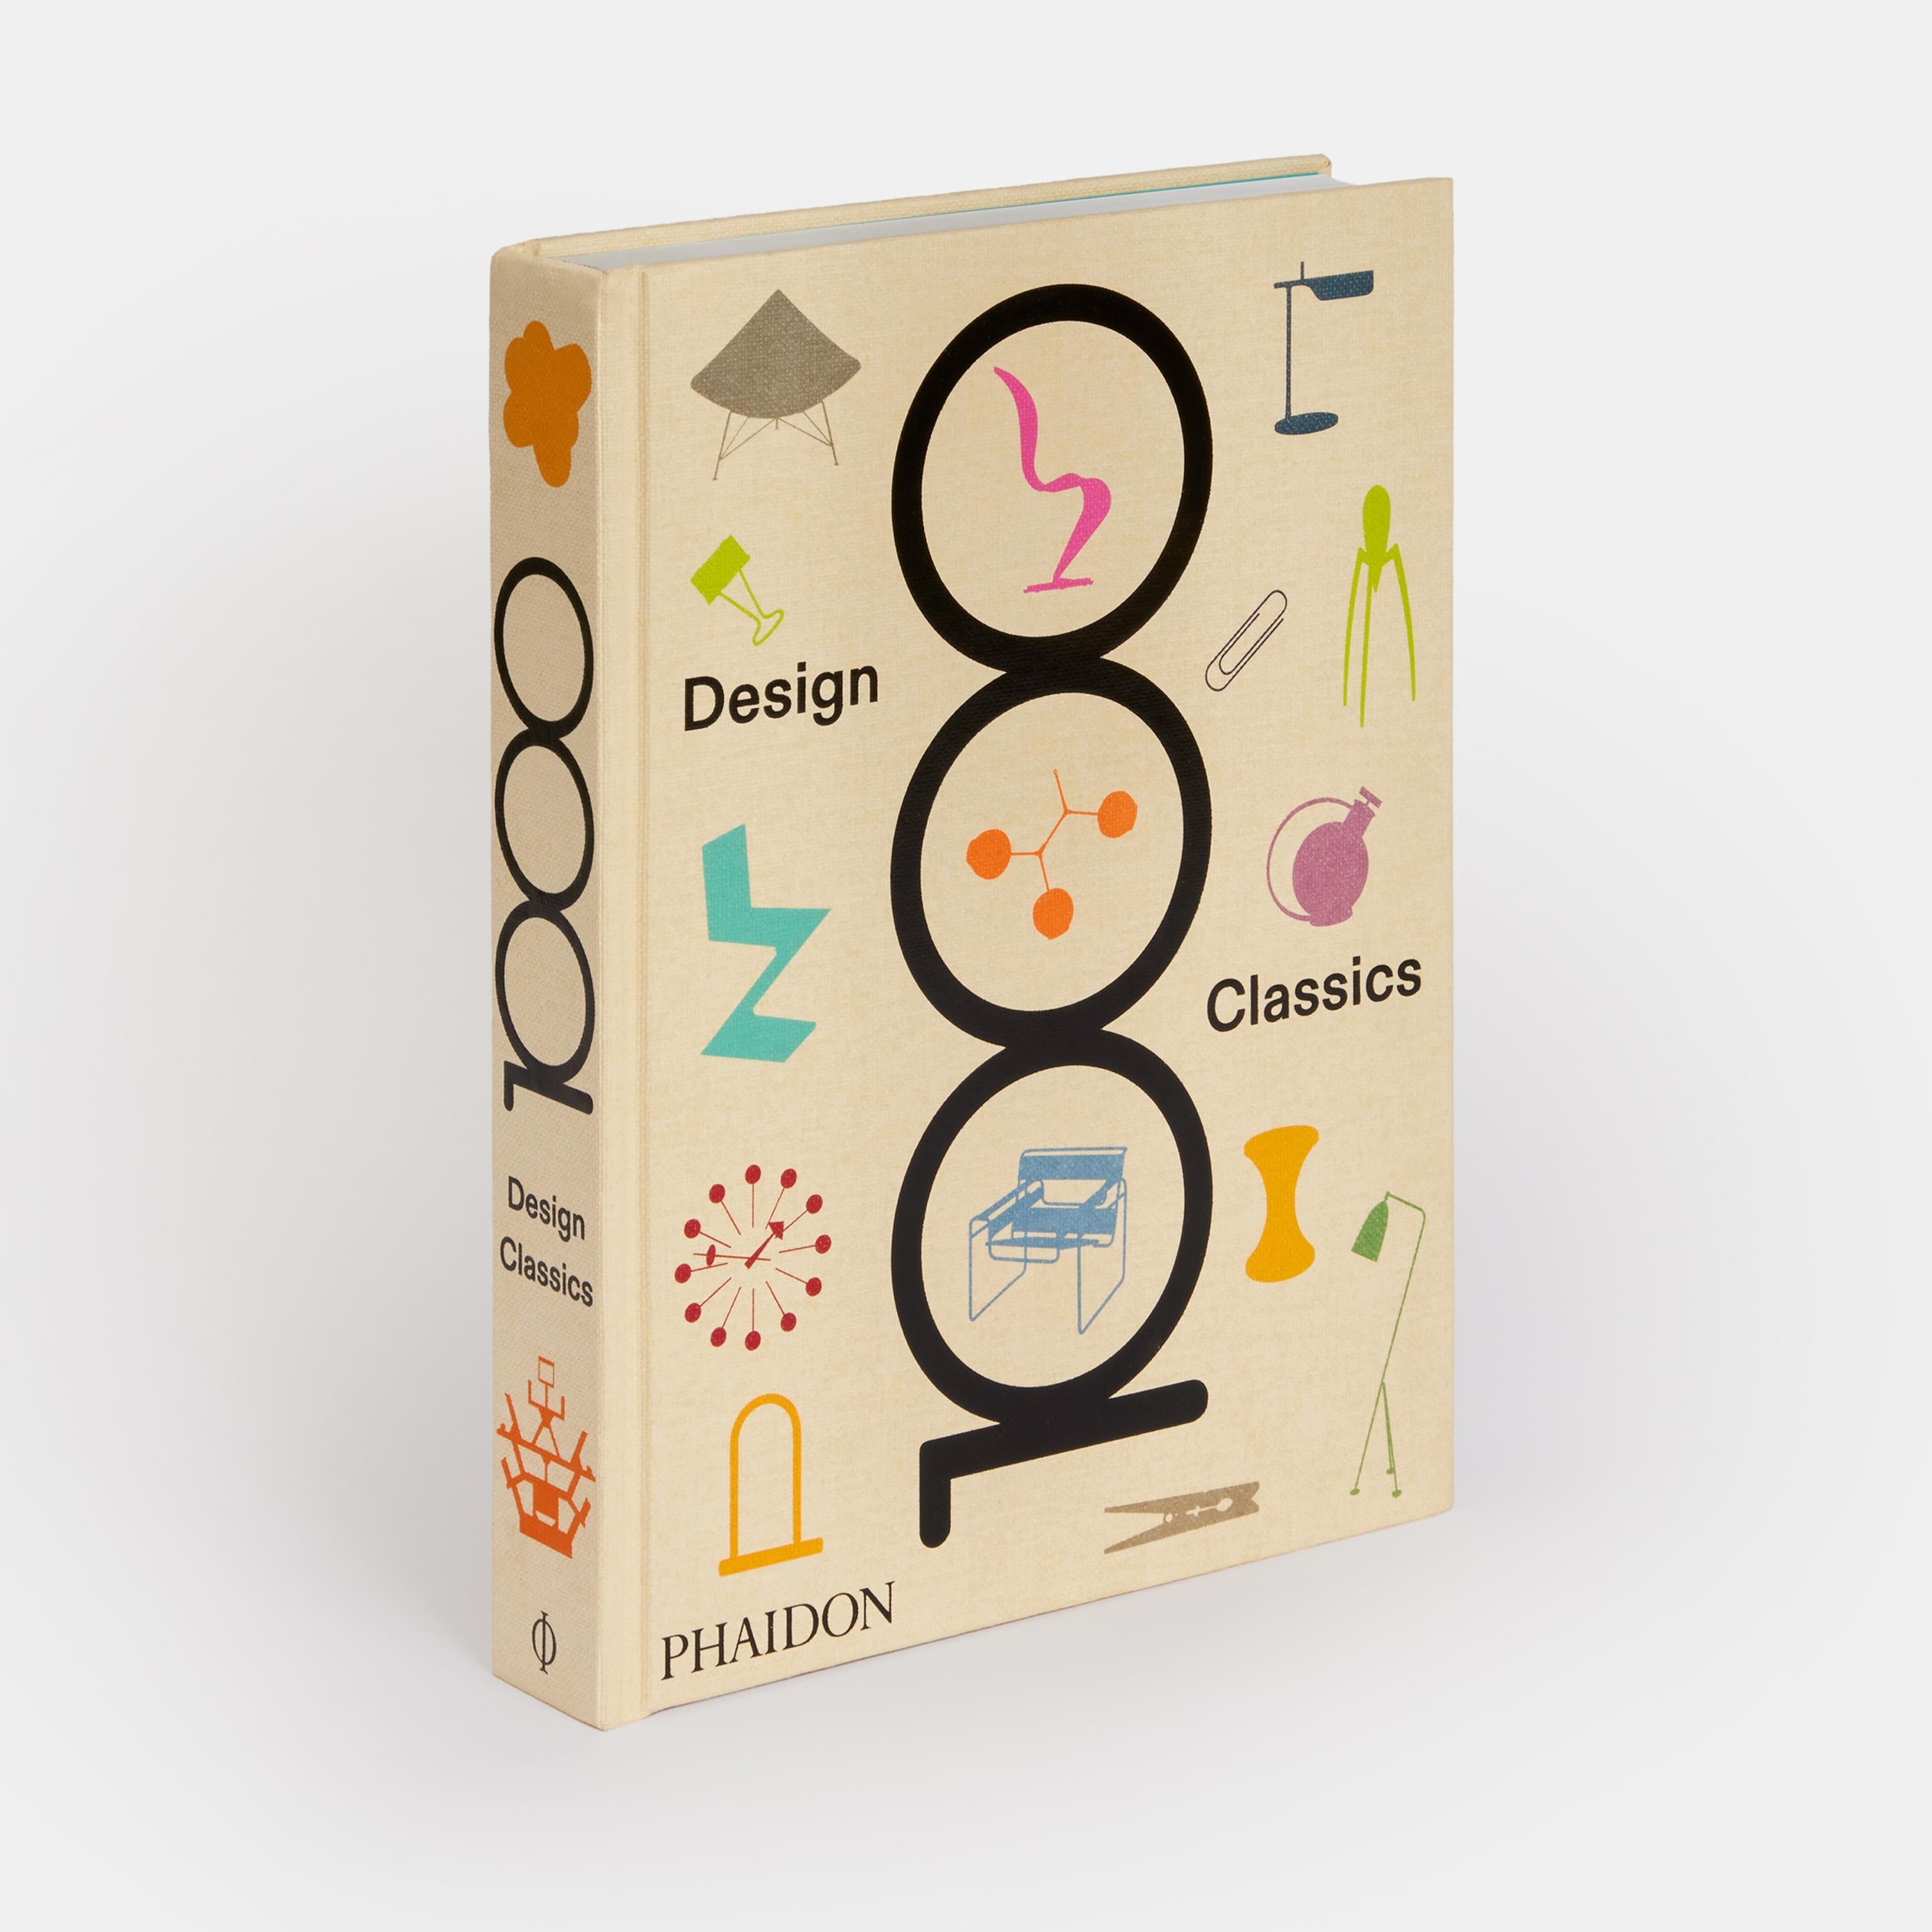 The most innovative, iconic, and influential products ever designed - from 1663 to the present day

Originating from the highly acclaimed and groundbreaking three-volume Phaidon Design Classics, this new book presents 1,000 of the world's greatest